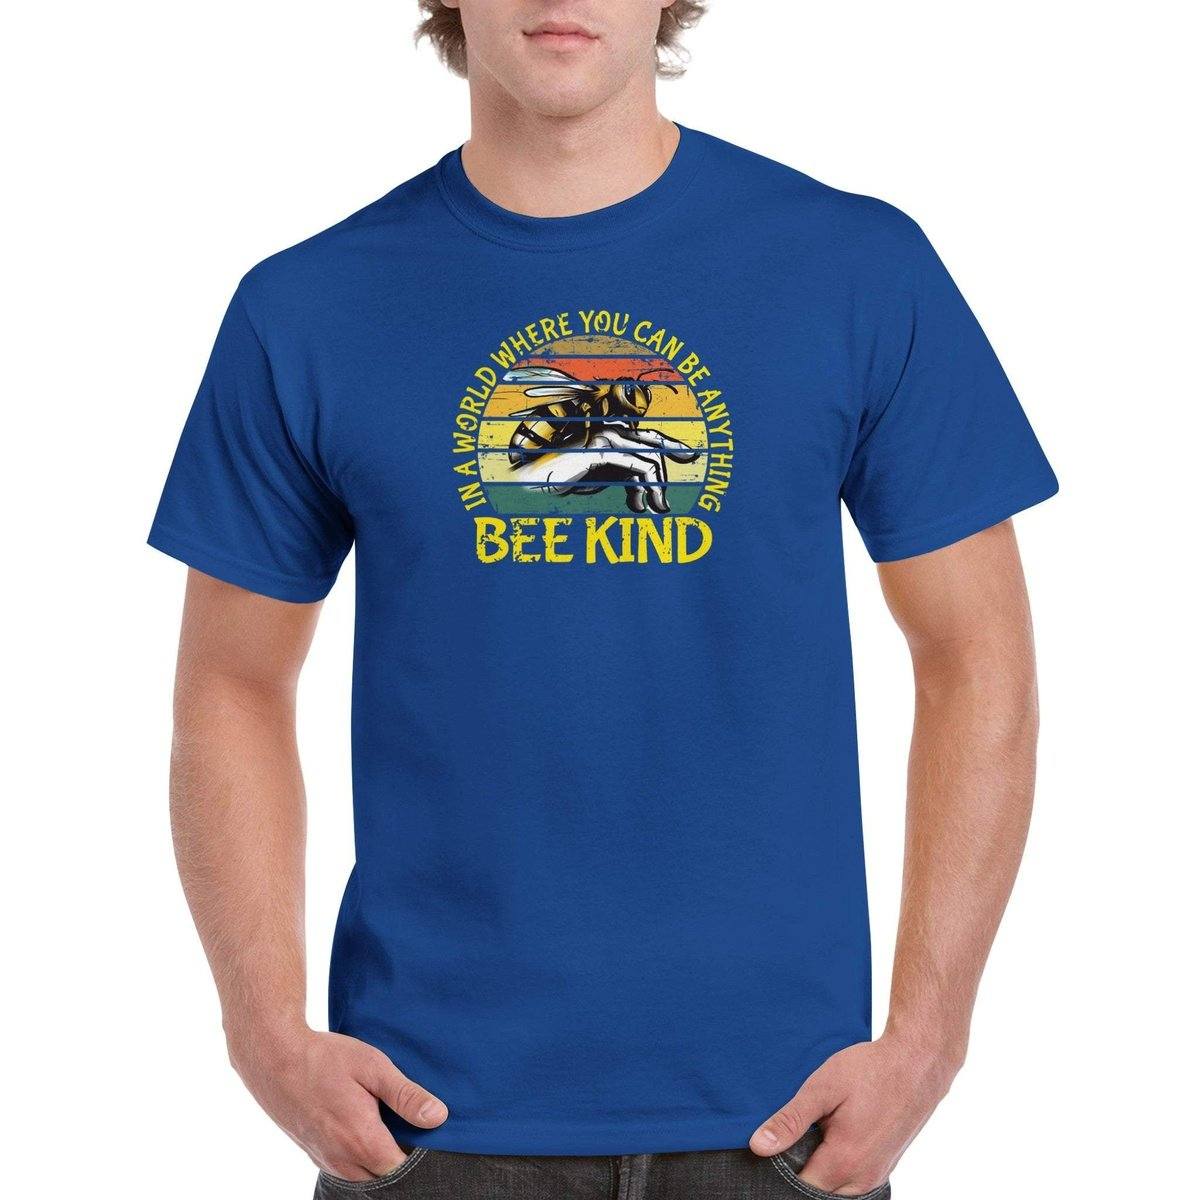 In a world where you can be anything bee kind Tshirt - Retro Vintage Bee - Unisex Crewneck T-shirt Australia Online Color Royal / S